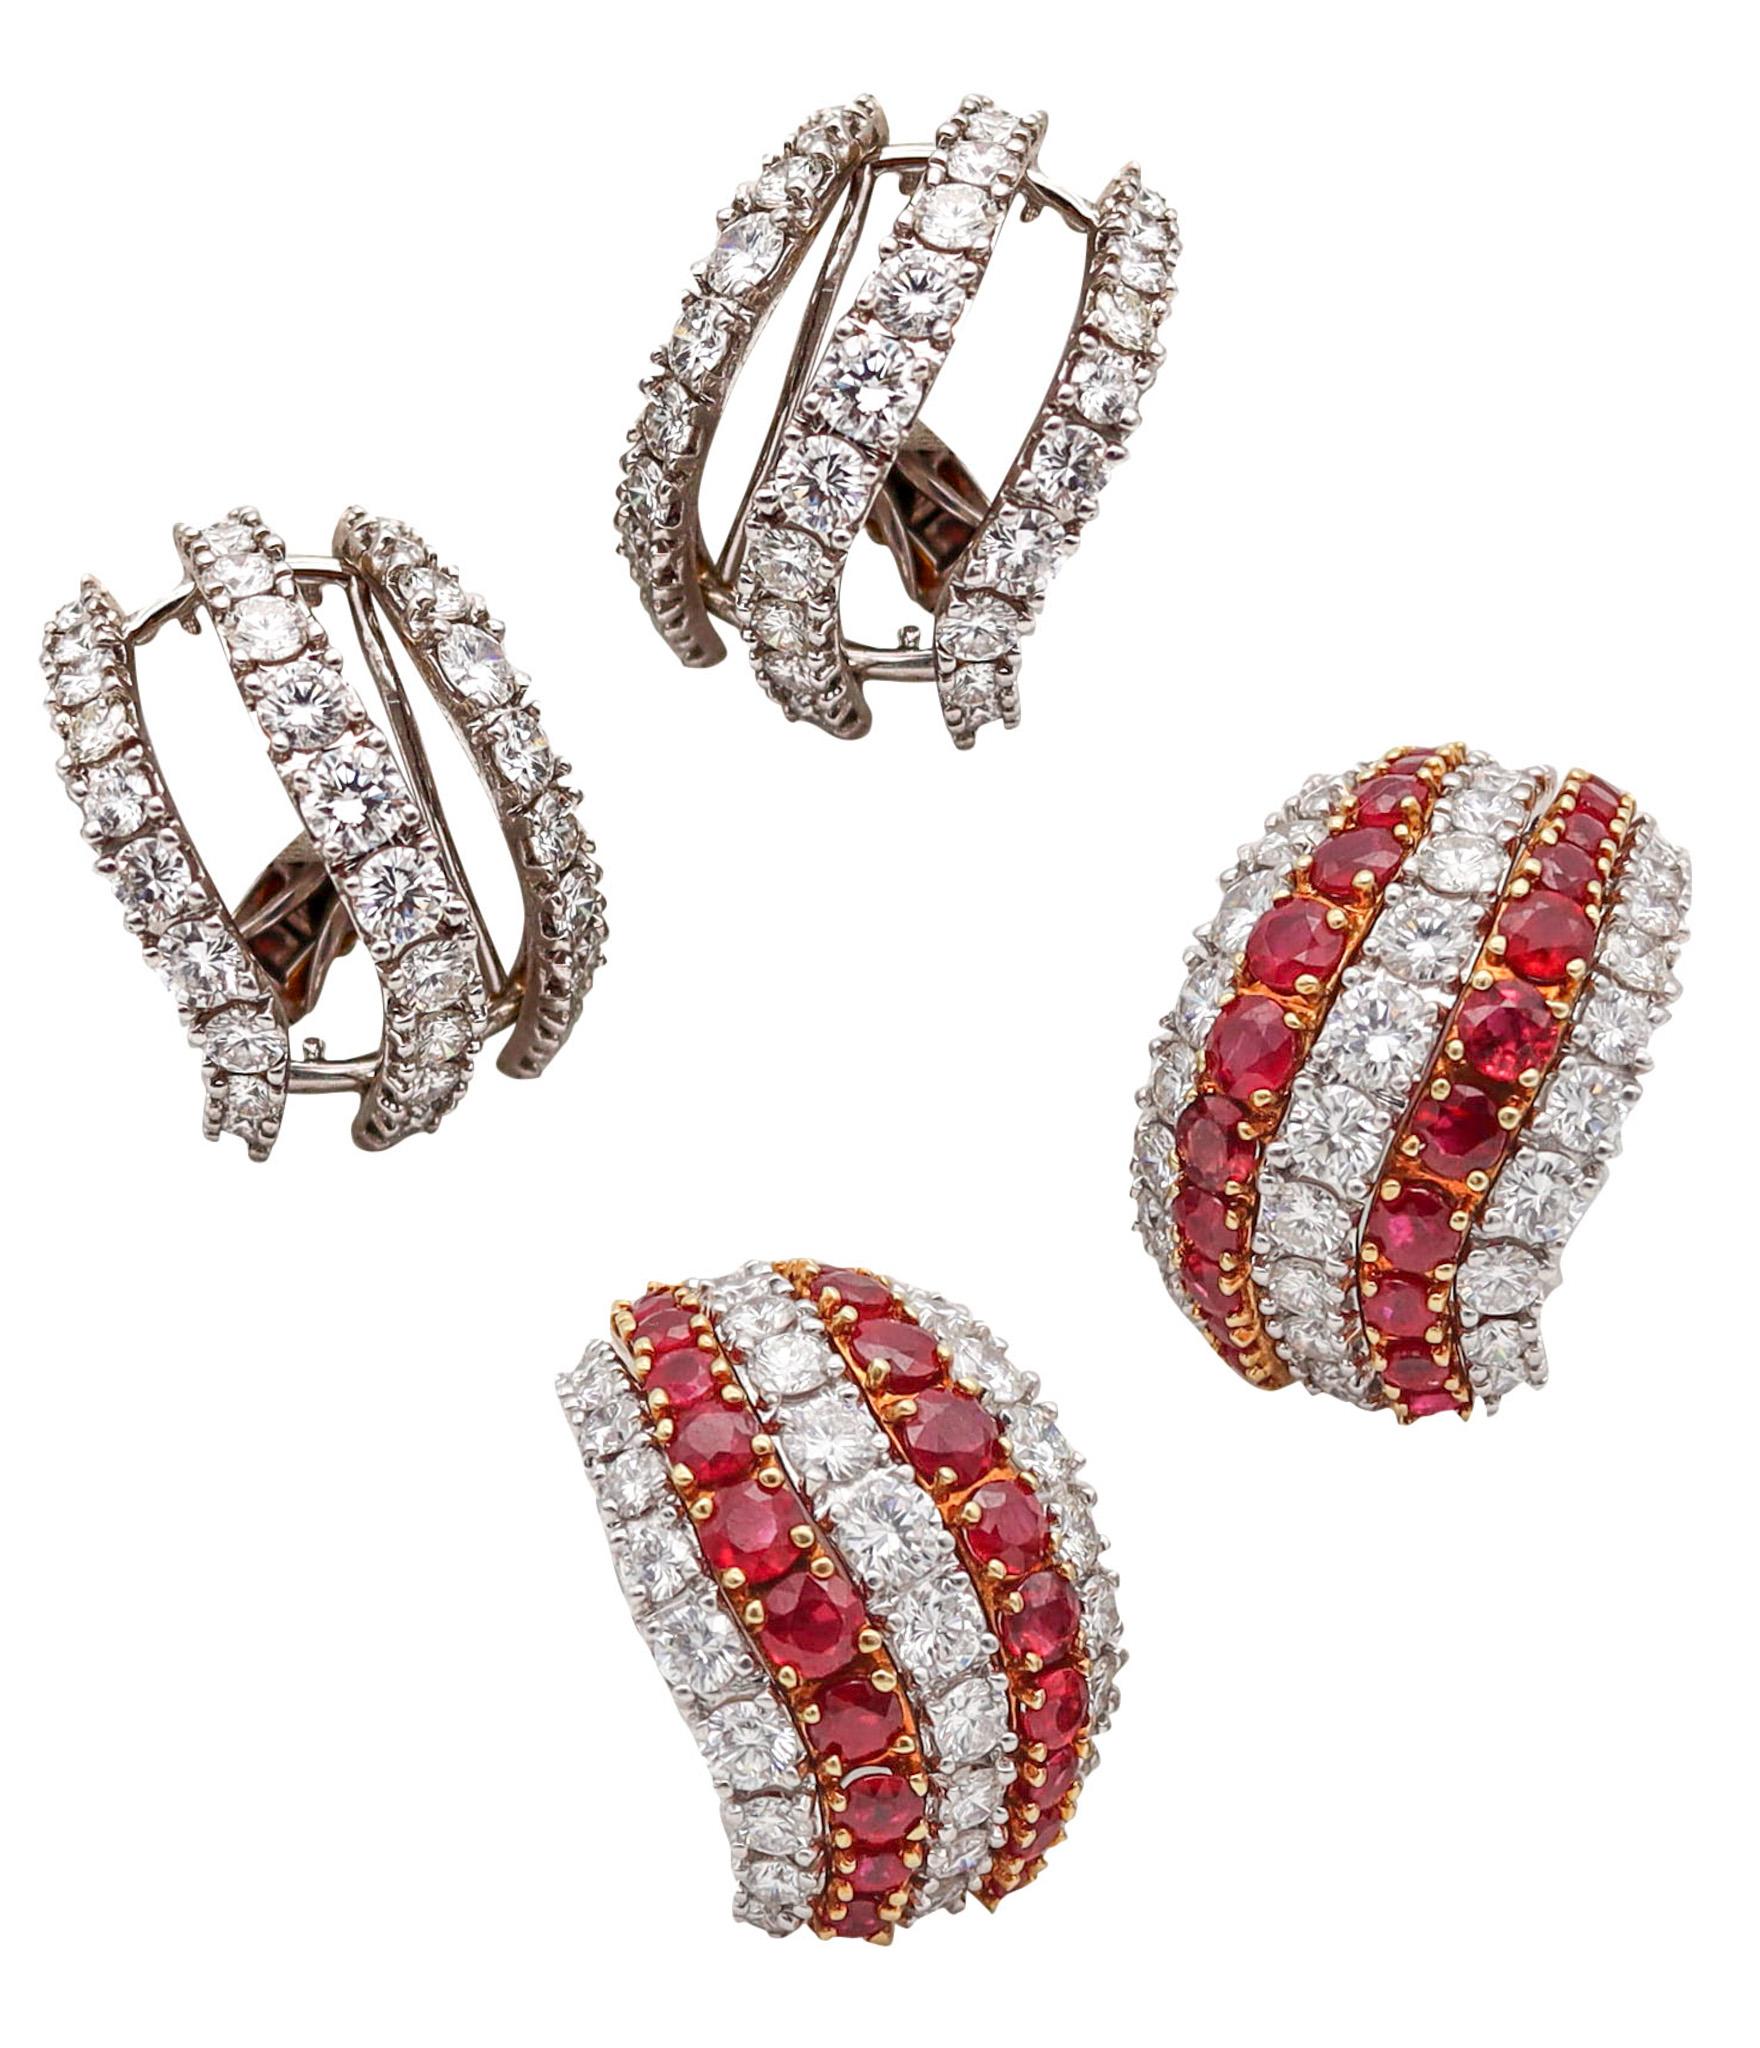 Women's Kutchinsky 1970 Clip Earrings 18Kt Gold Platinum And 21.02 Ctw Diamonds & Rubies For Sale